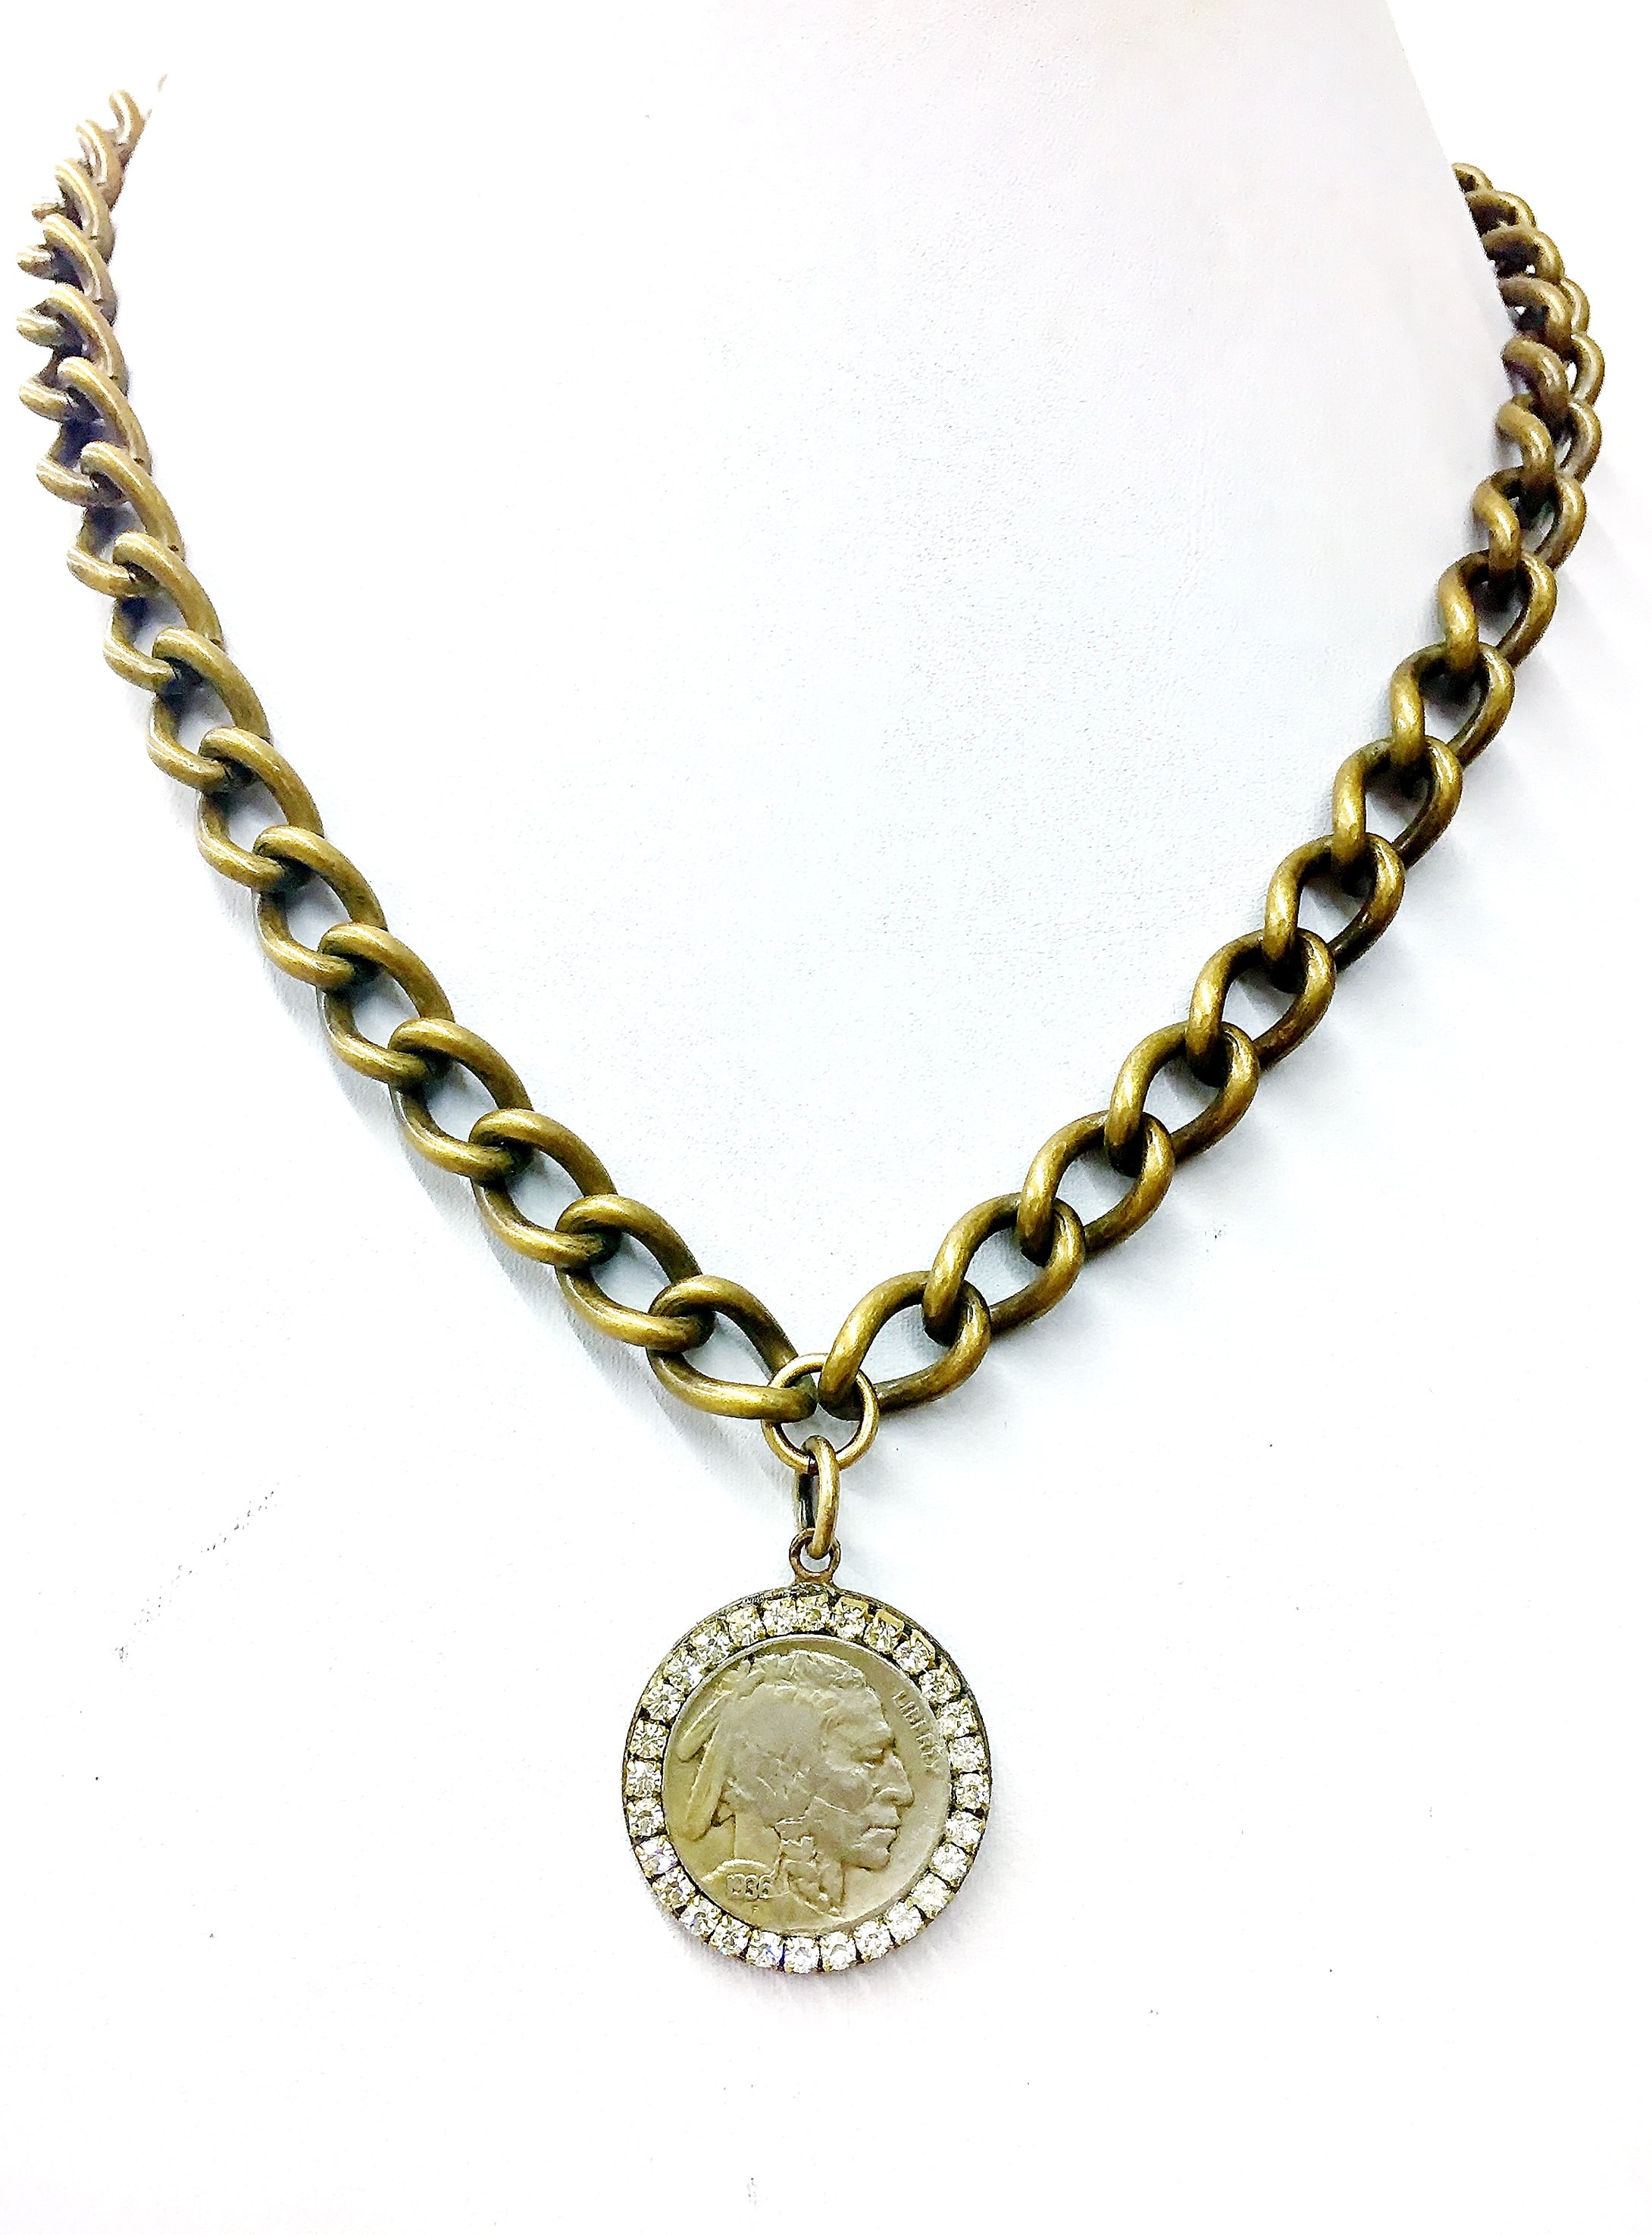 Jeweled Indian Nickel Necklace